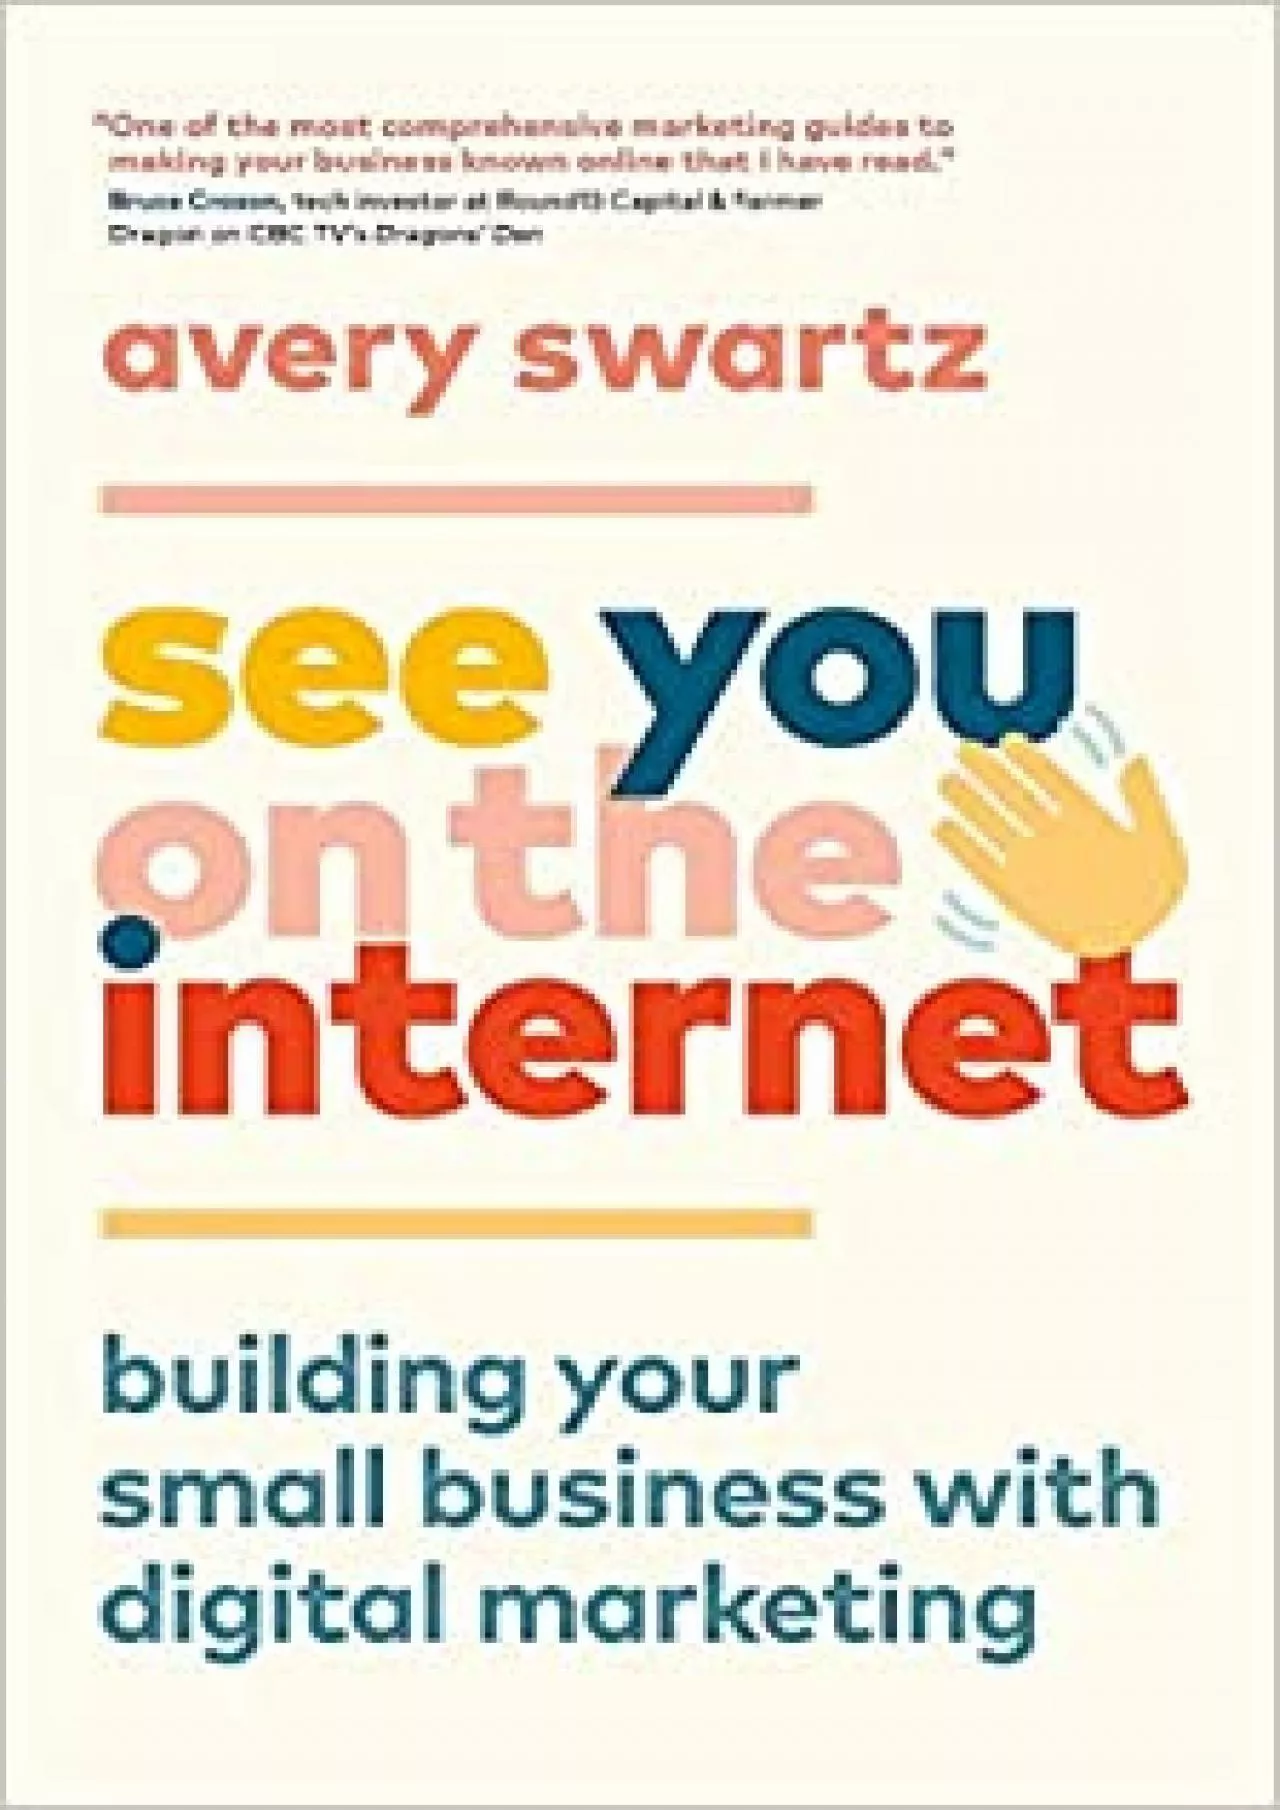 See You on the Internet Building Your Small Business with Digital Marketing